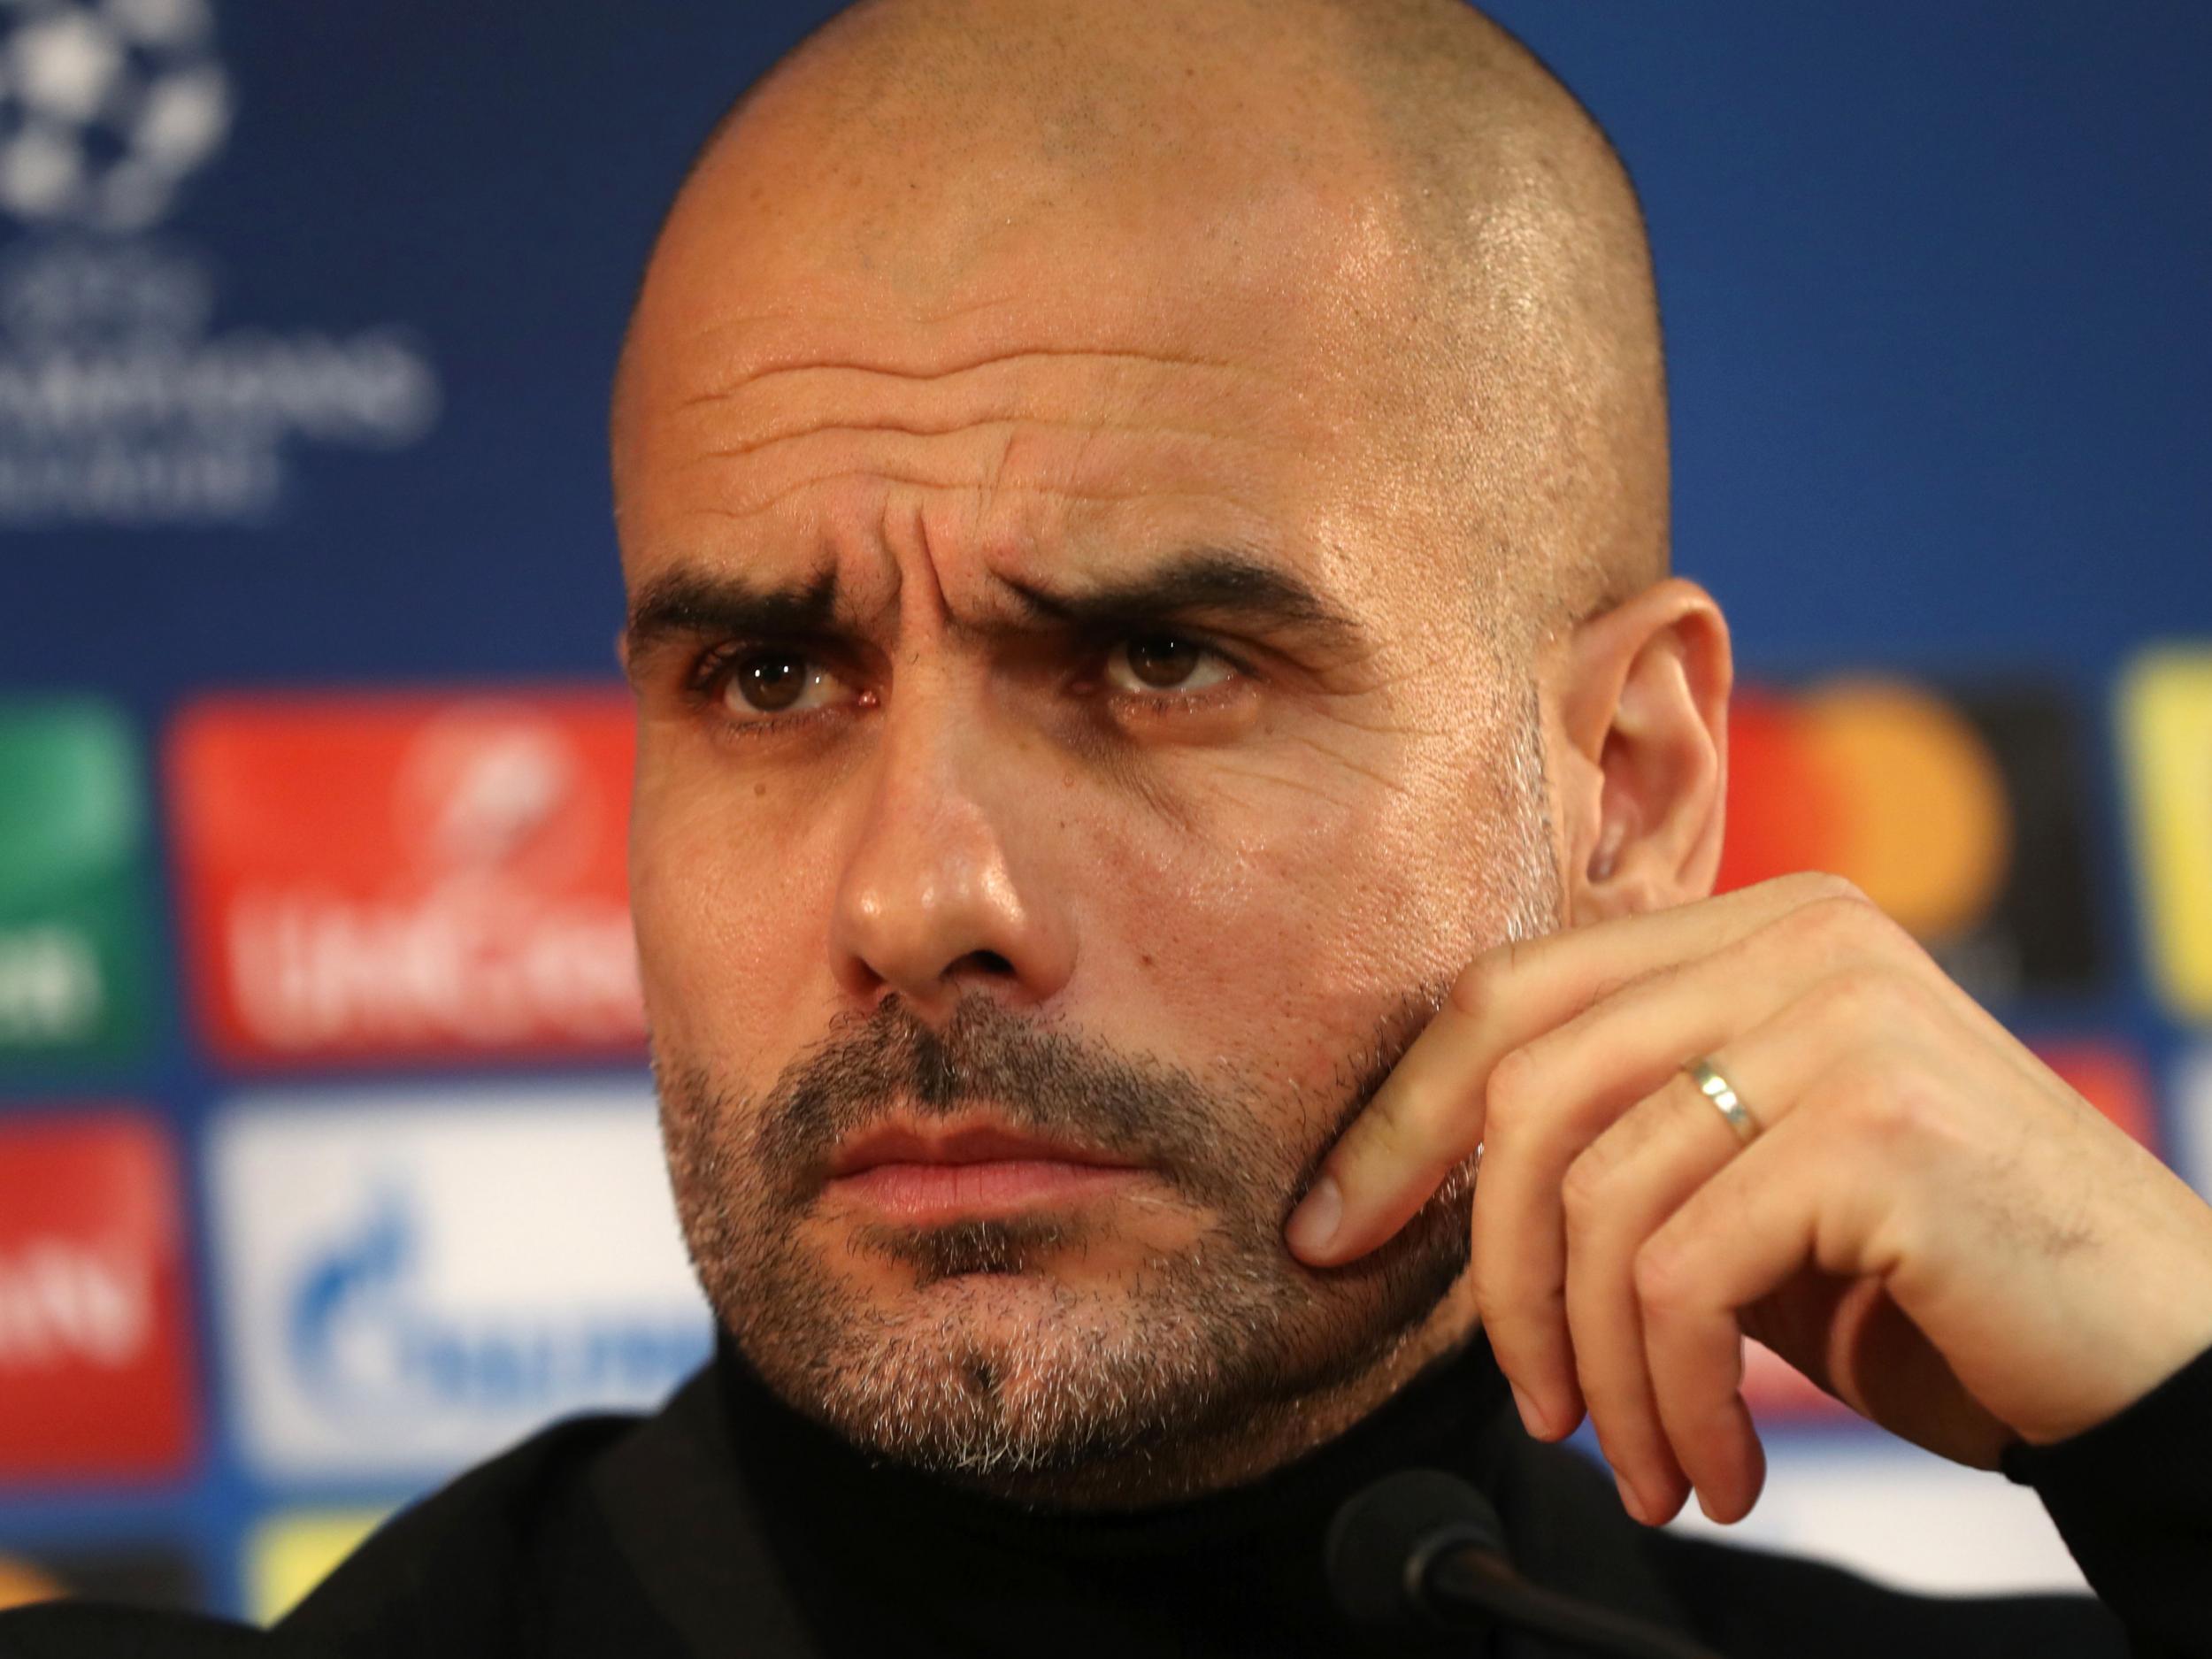 Guardiola thinks it would be pointless trying to defend